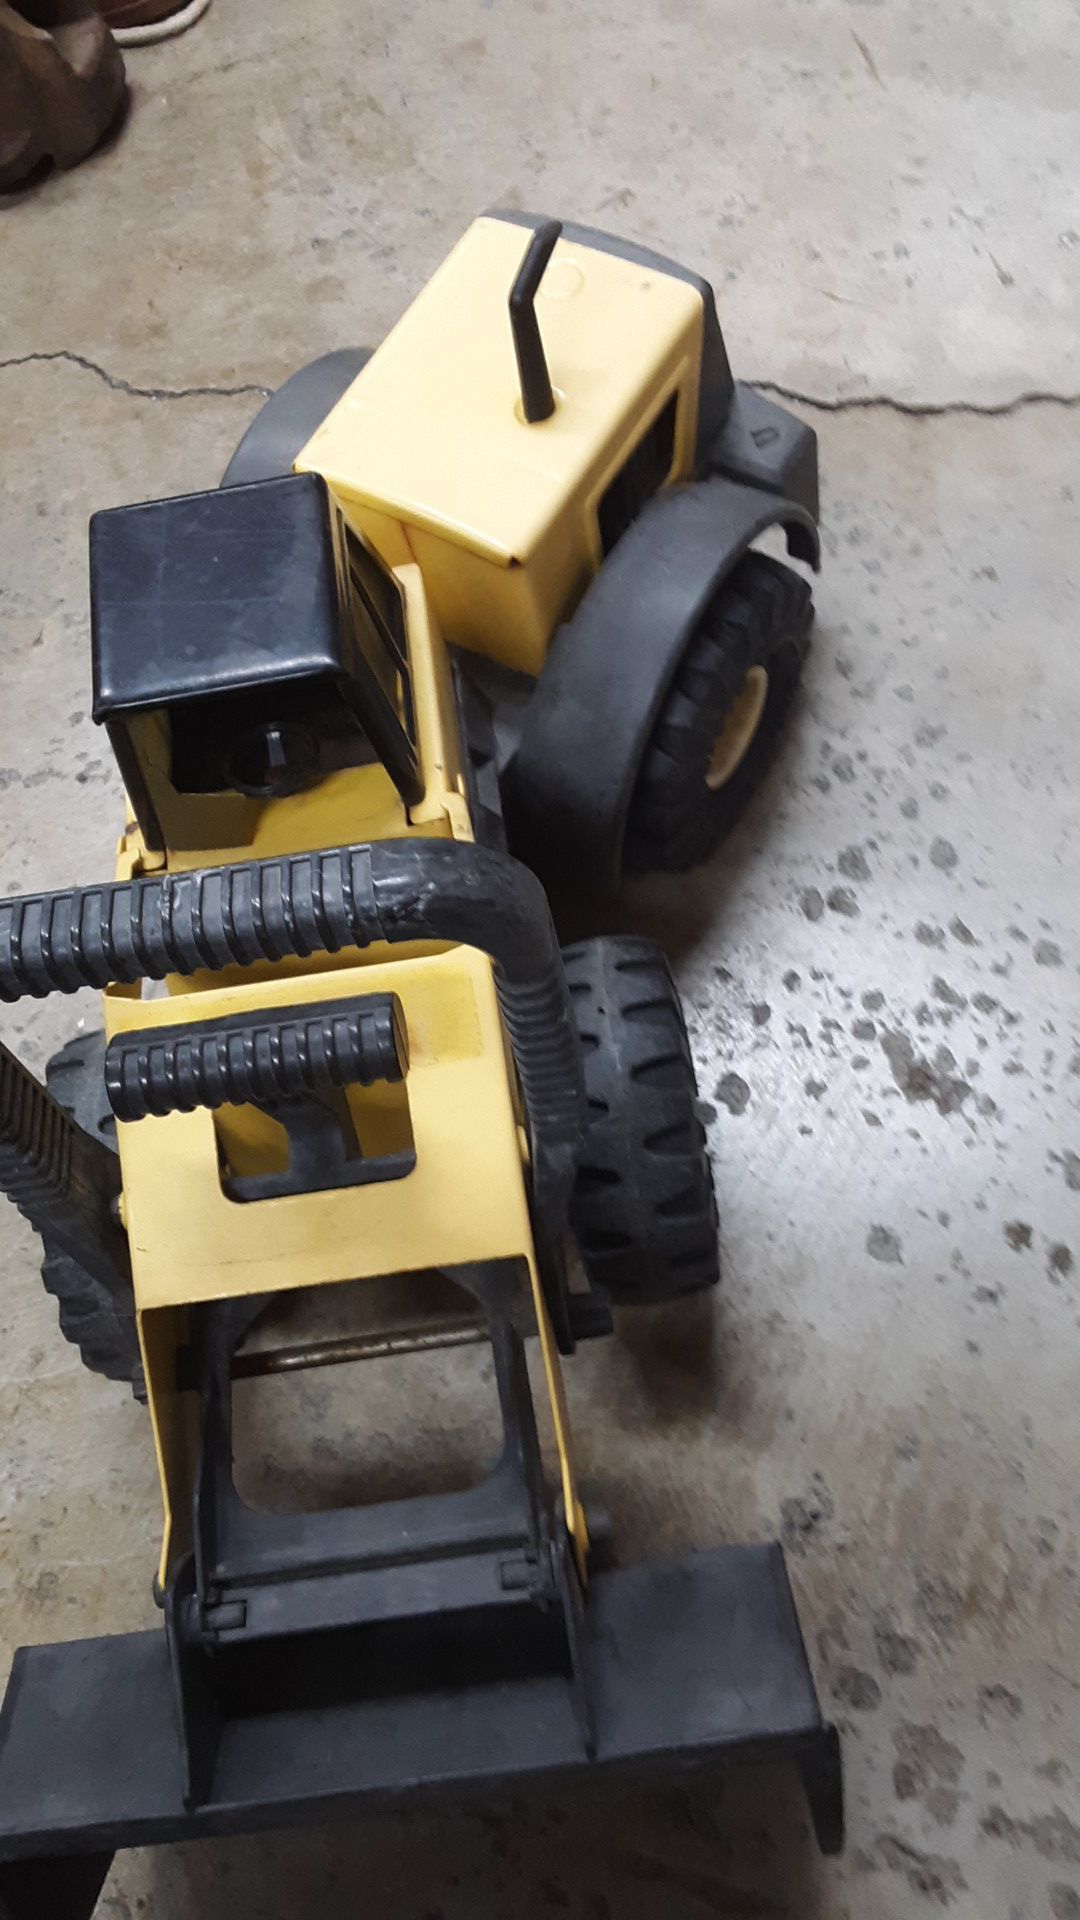 Used and very loved Tonka Tractor